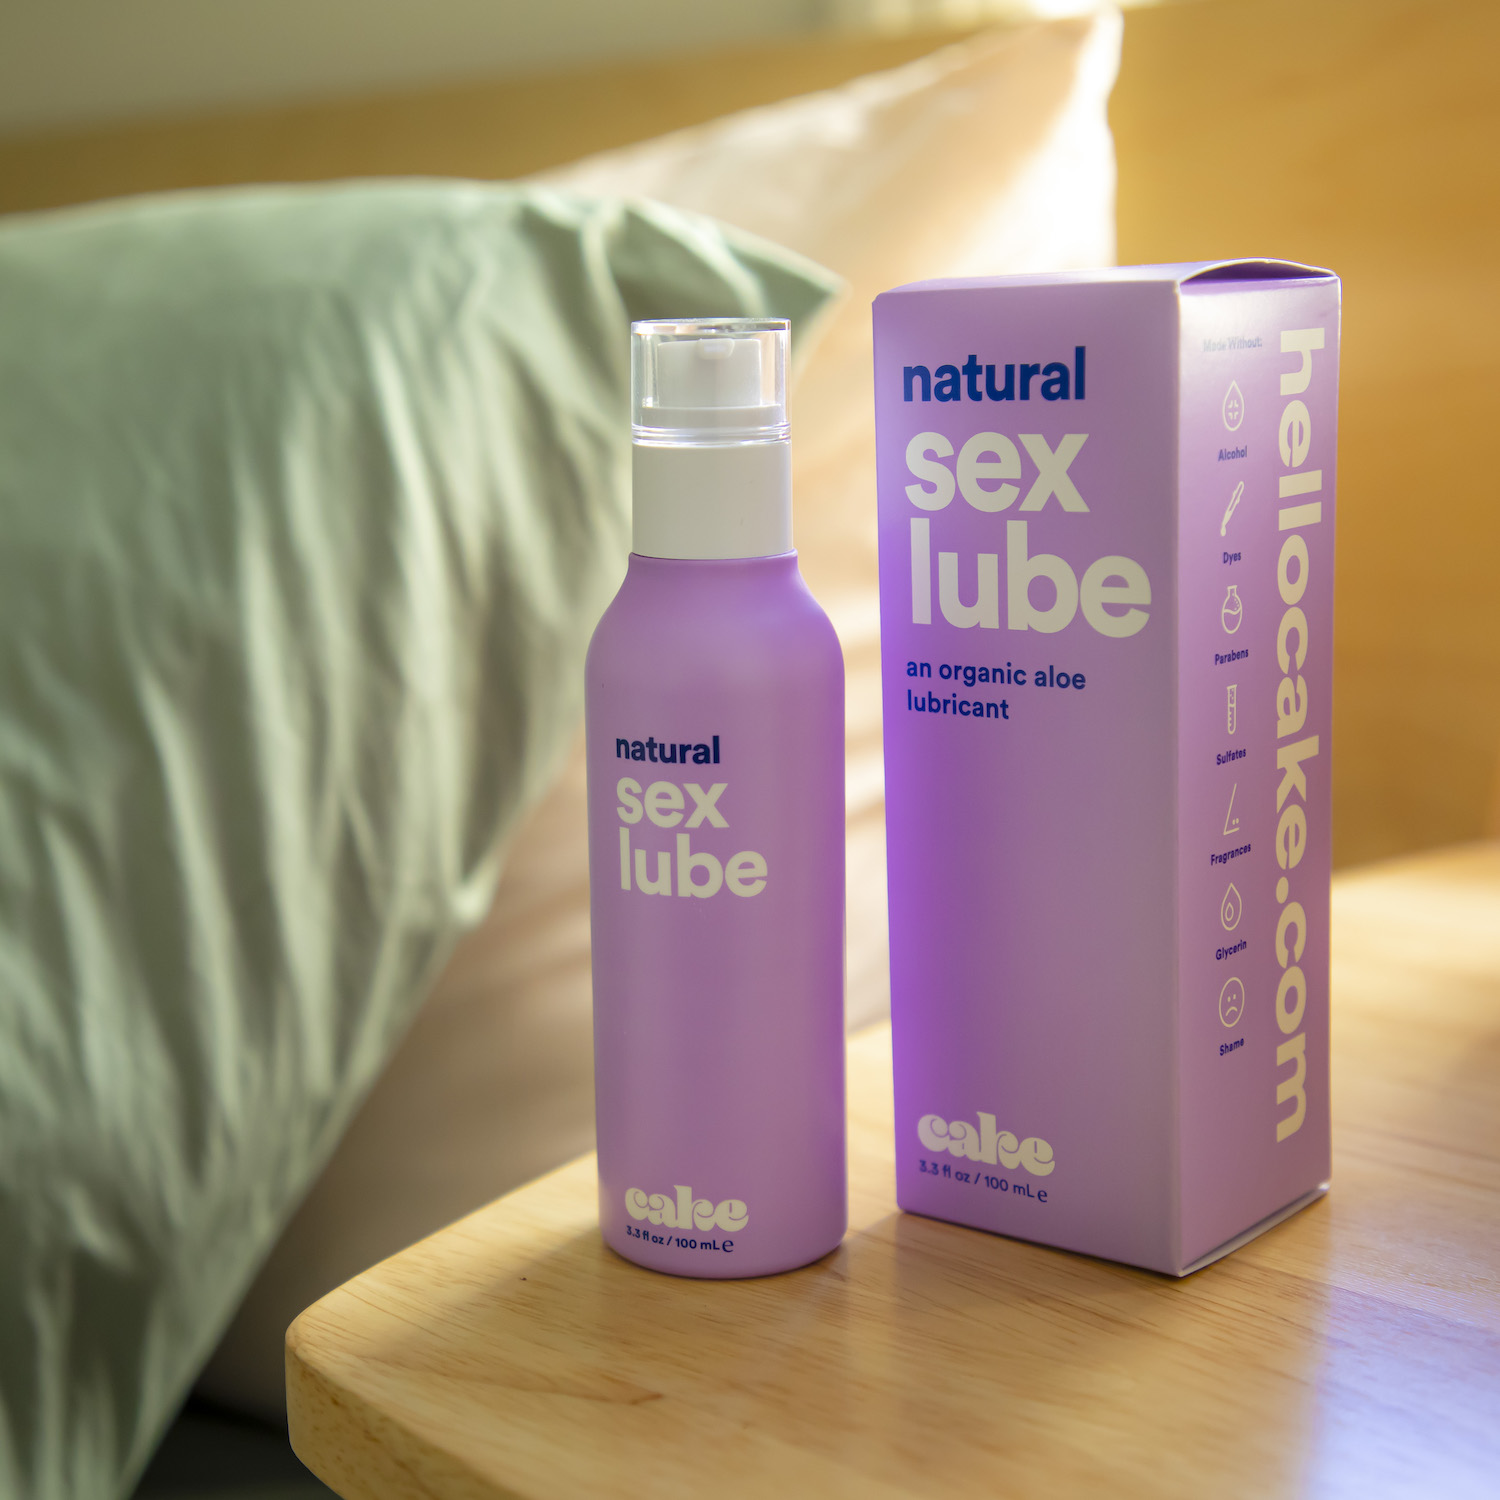 Natural Lubricant for Sex Hello Cake pic pic